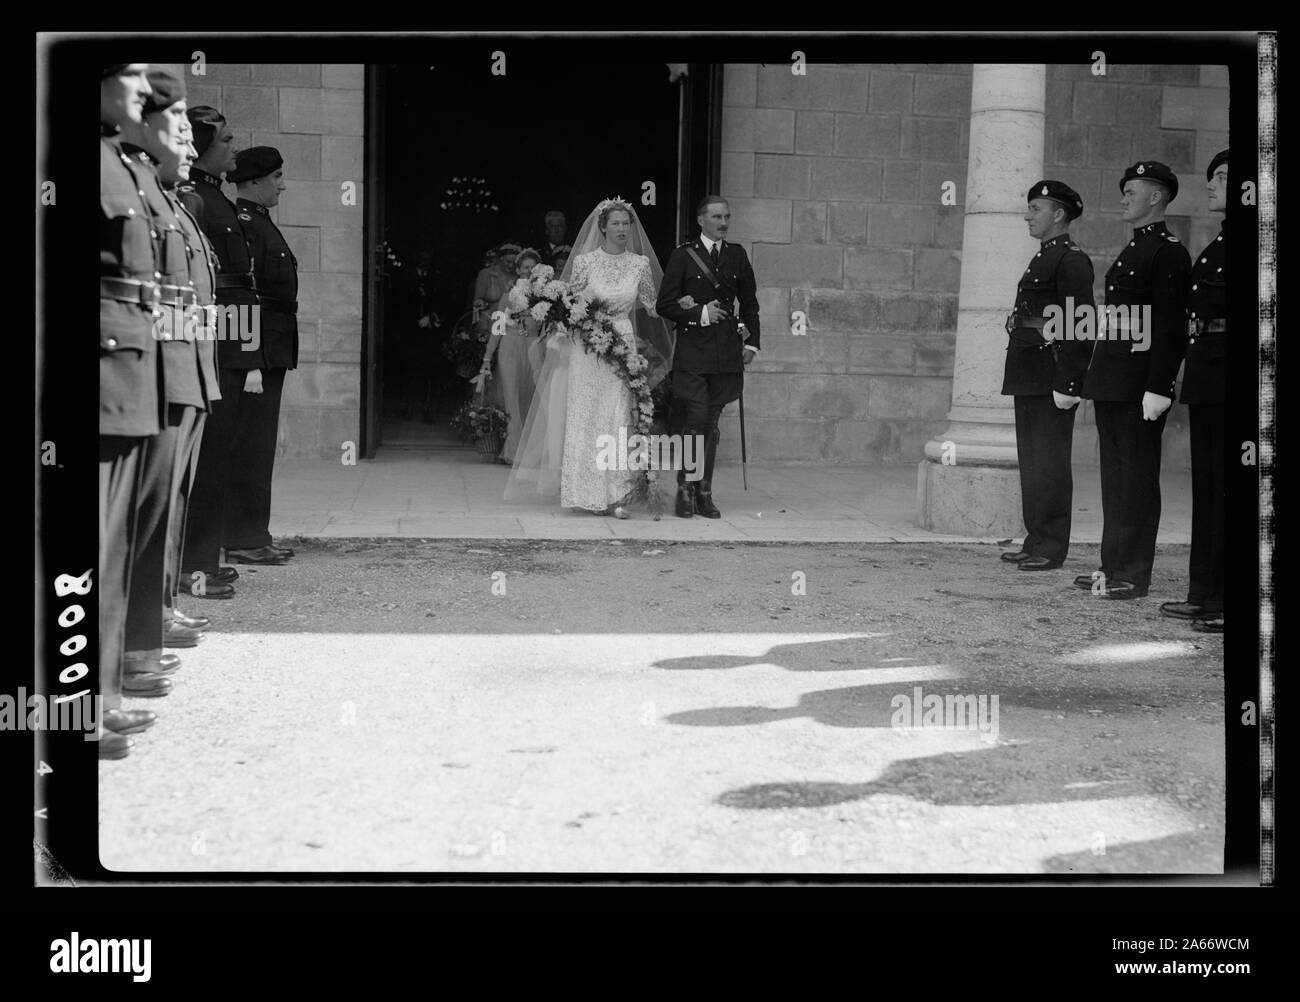 Wedding of Miss Olwen Wainright. The bride & groom, Mr. Walter Peter Purcell-Gilpin coming out from the church followed by bride's maids after the ceremony, showing guard of honour by Br. Police Stock Photo